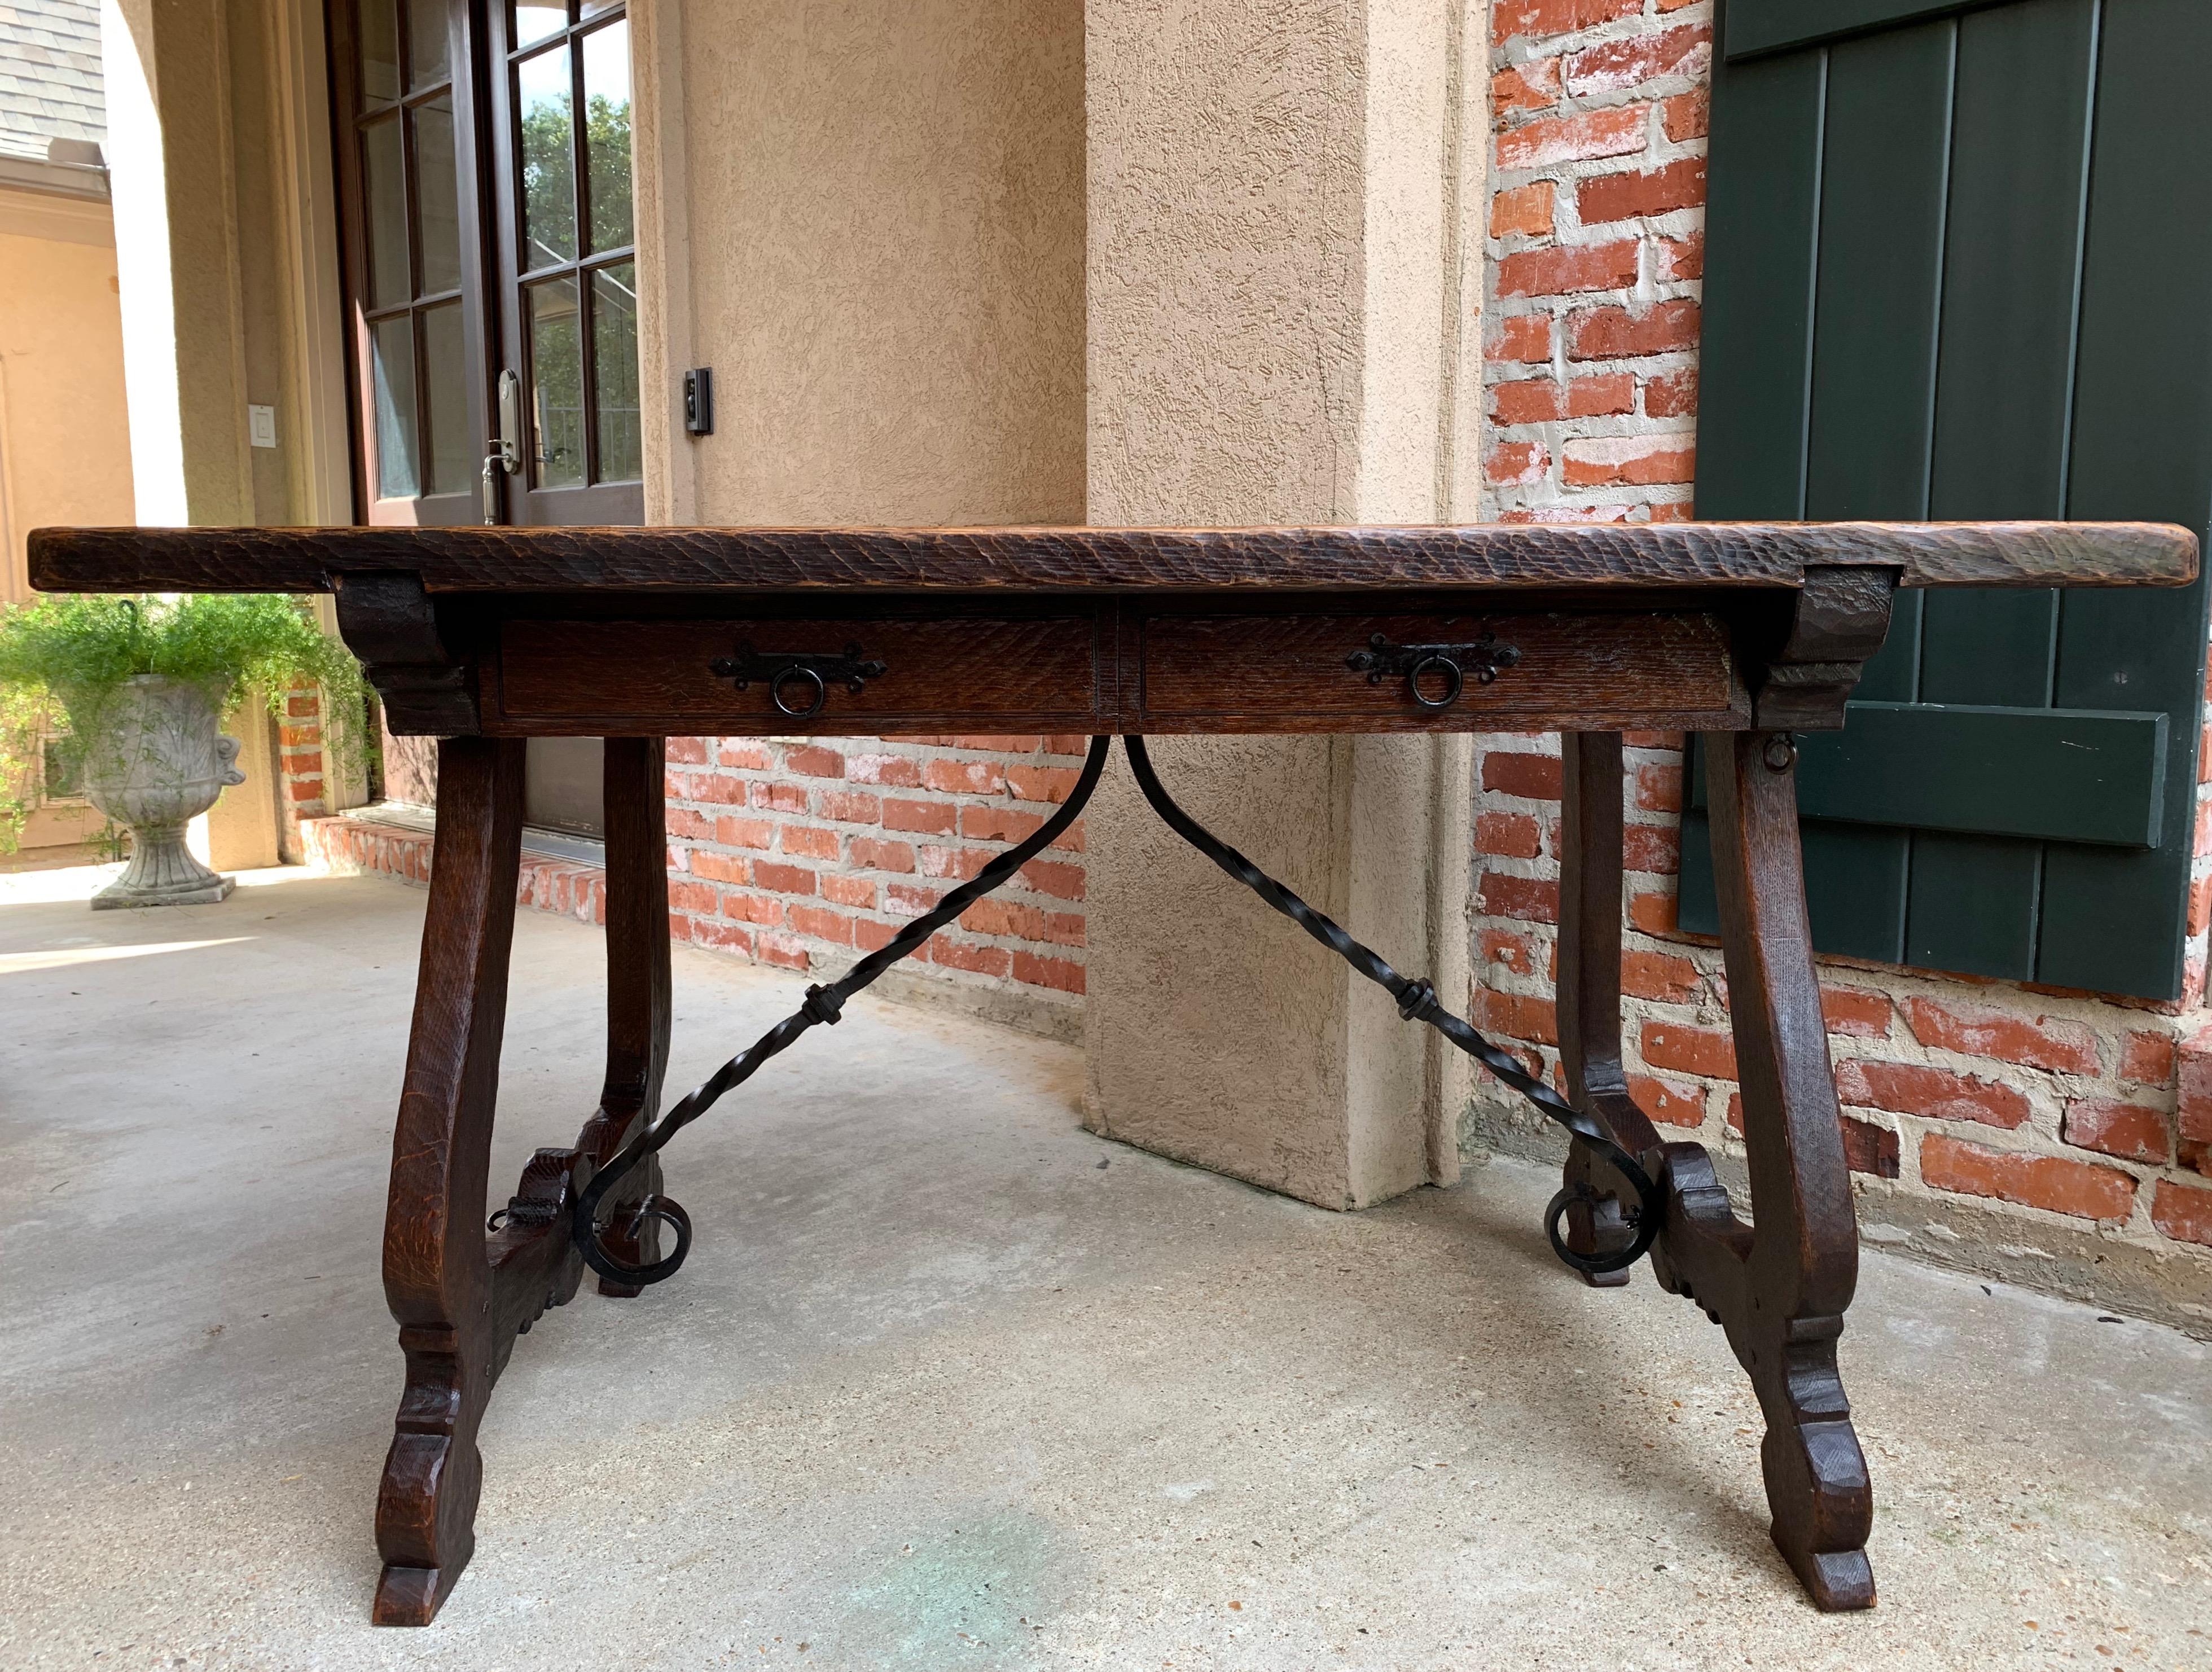 Direct from Europe, one of several outstanding solid wood antique desks/tables from our last buying trip, with that Spanish Catalan style design that complements any décor from French Country to farmhouse to traditional~
~This one is a smaller